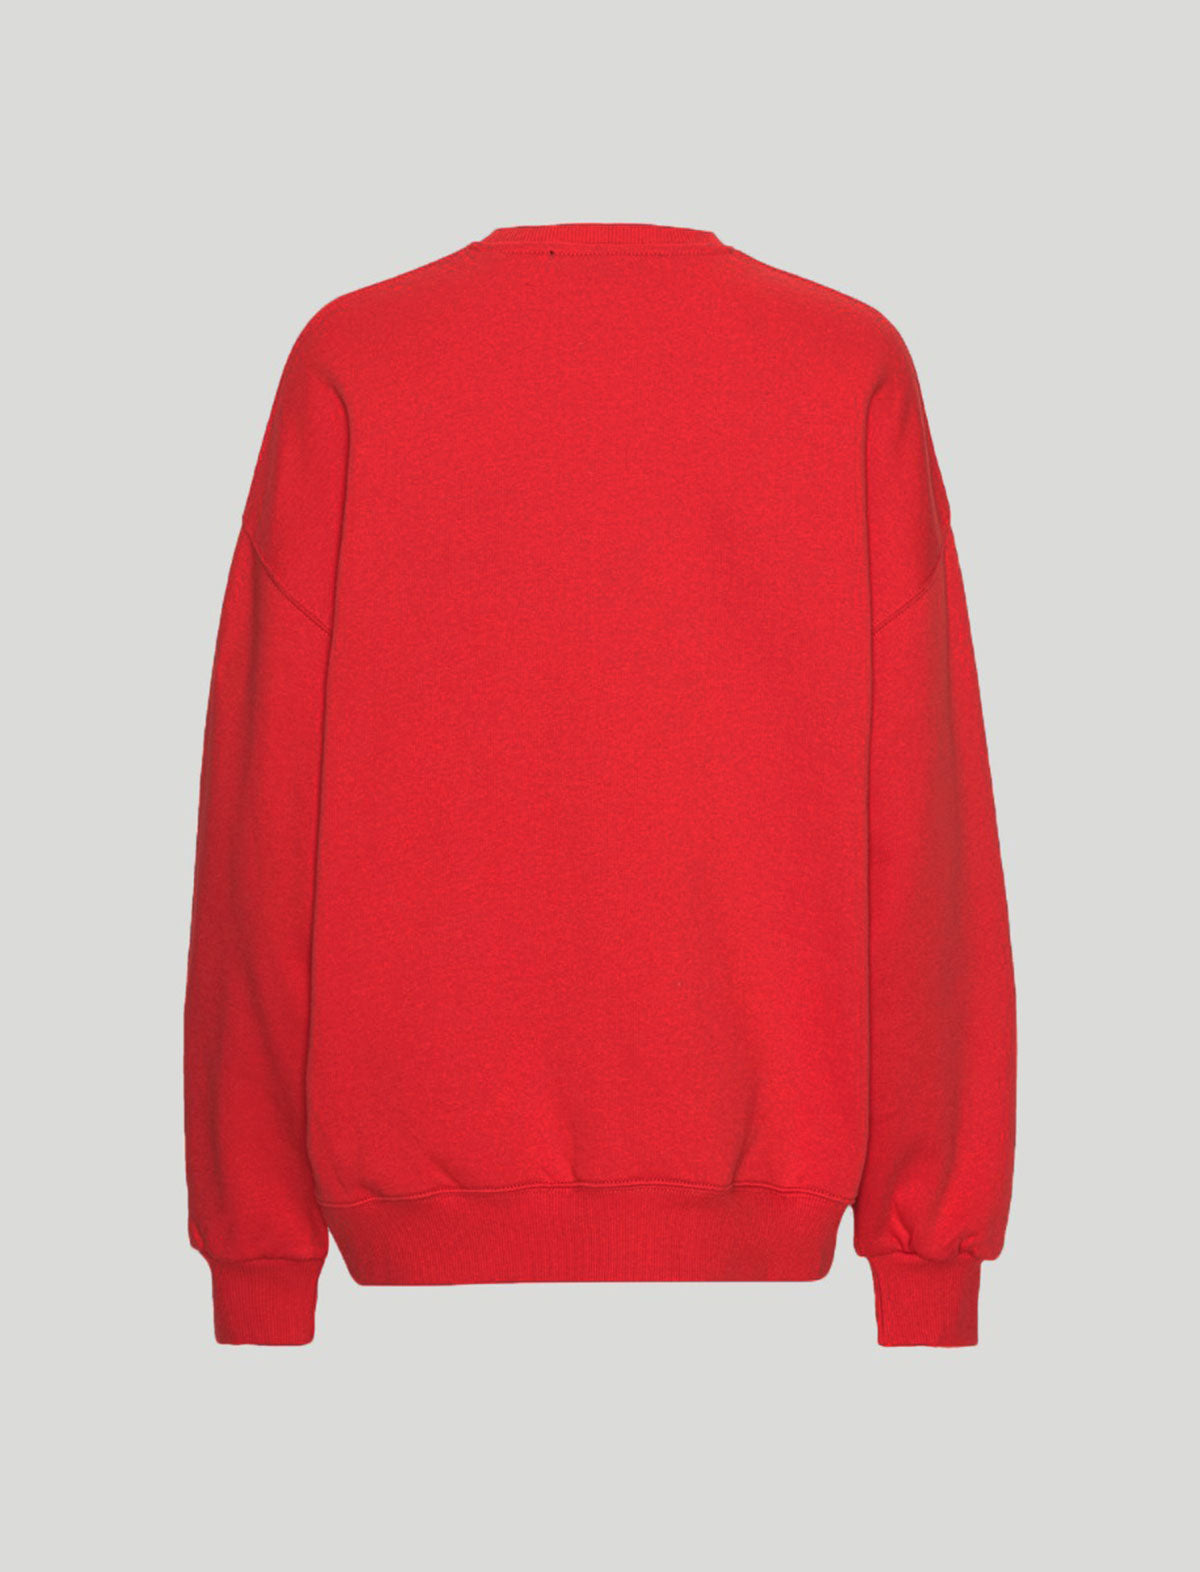 ROTATE SUNDAY 6 Crystal Crewneck Sweater in Fiery Red